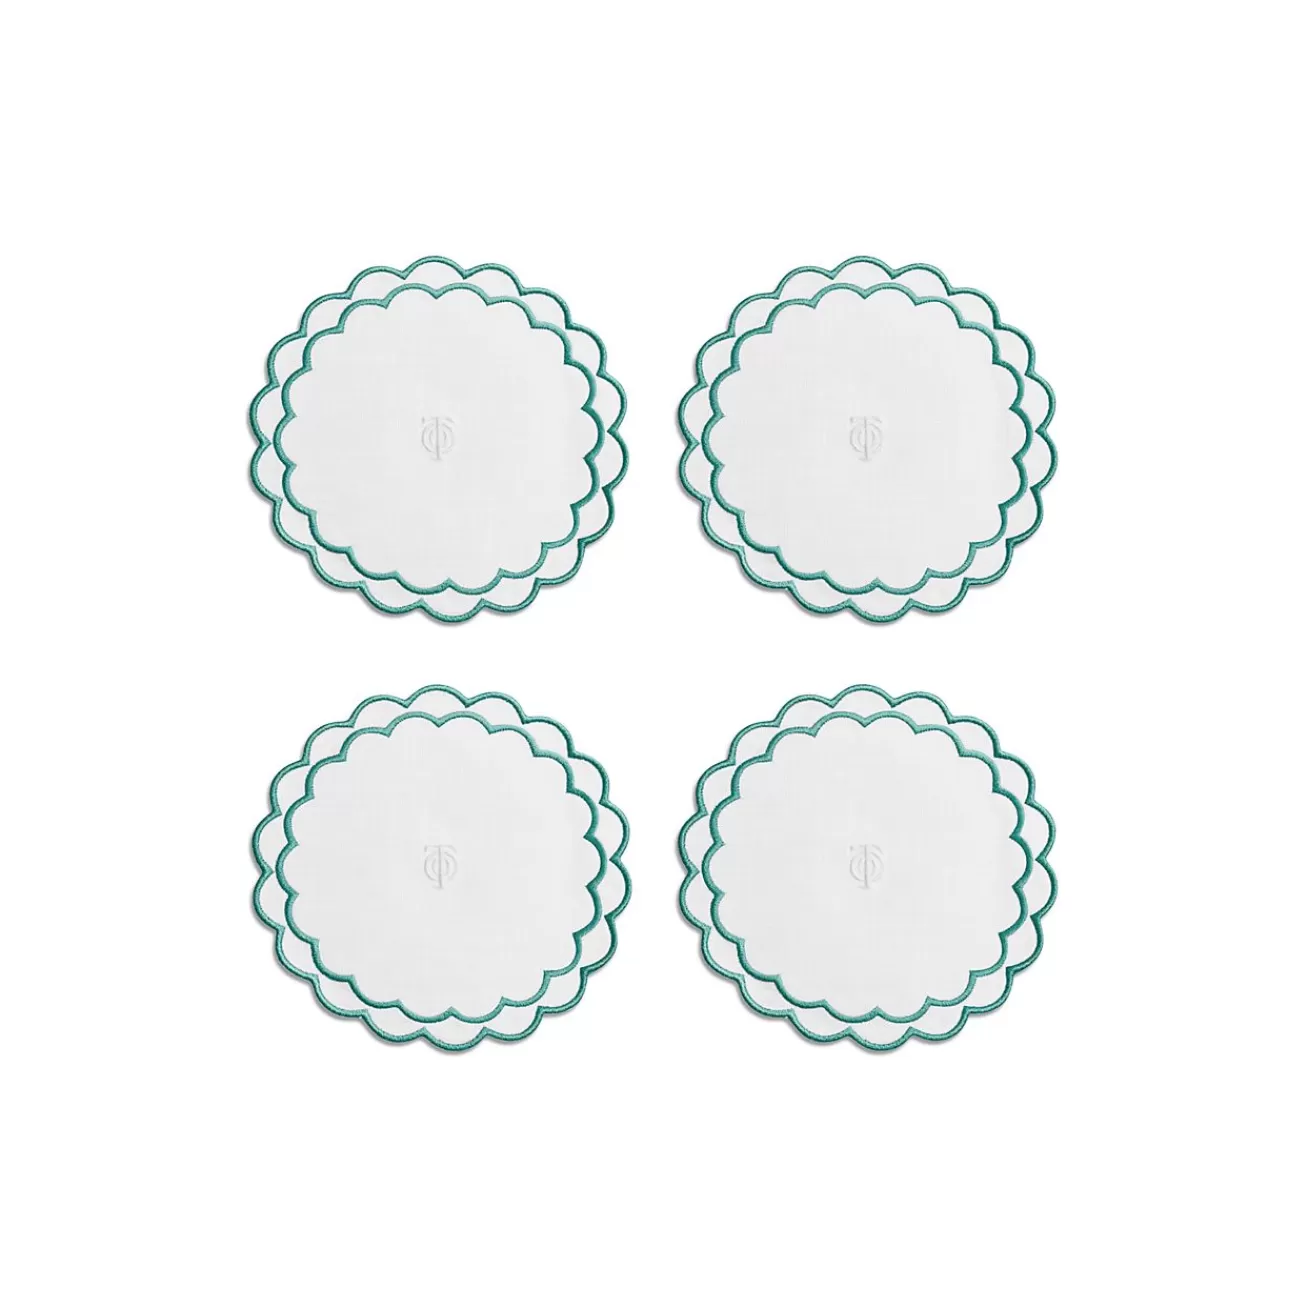 Tiffany & Co. Tiffany Home Essentials Scalloped Coasters in White Linen, Set of Four | ^ The Home | Housewarming Gifts